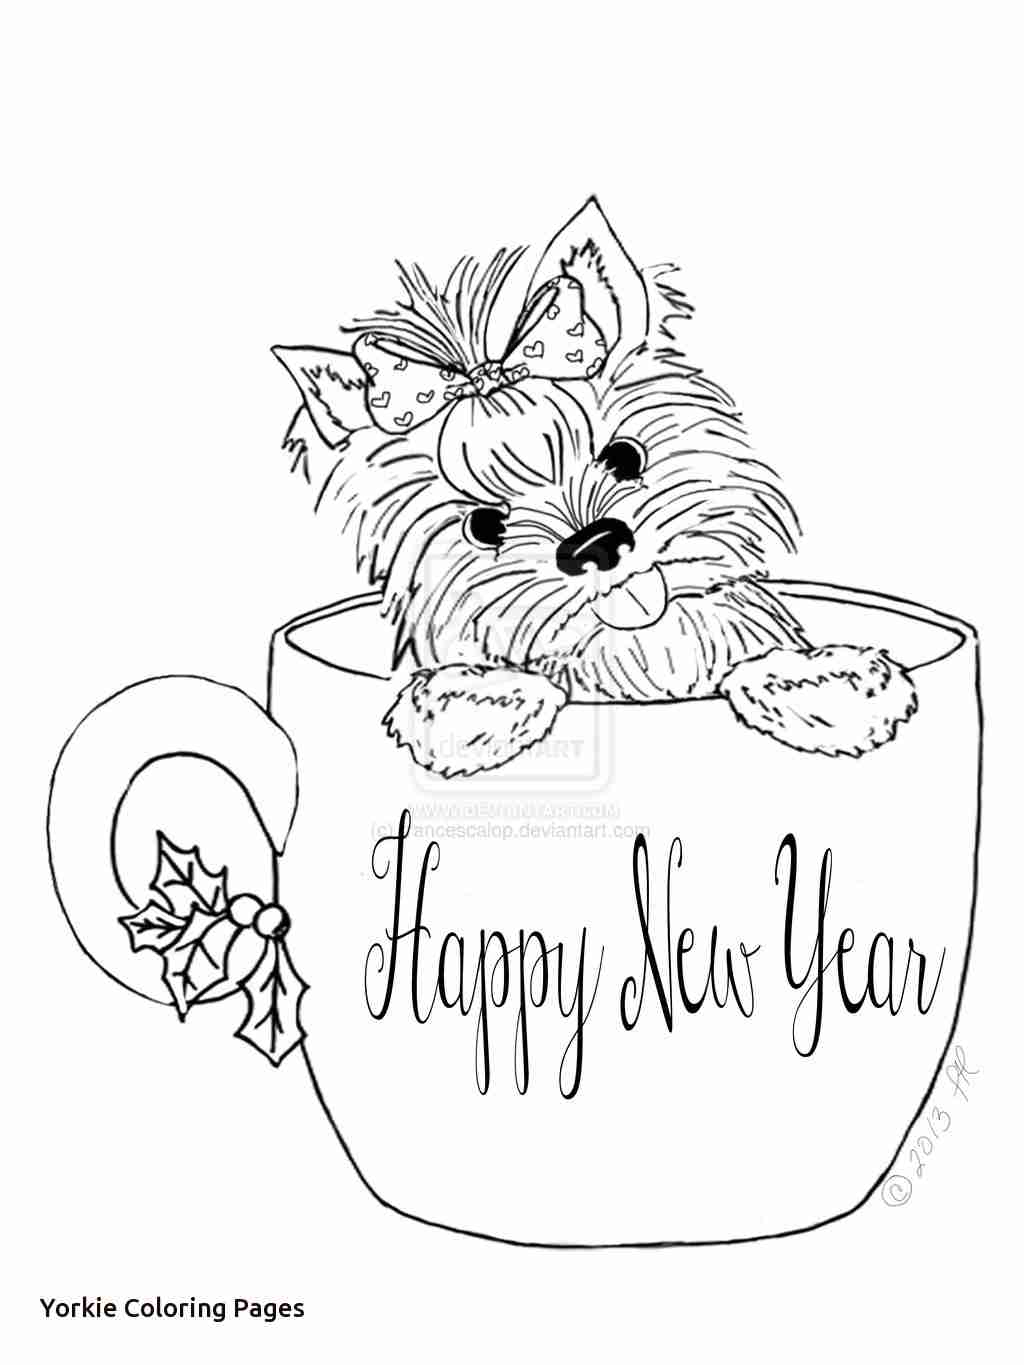 Yorkie Coloring Pages at GetColorings.com | Free printable colorings